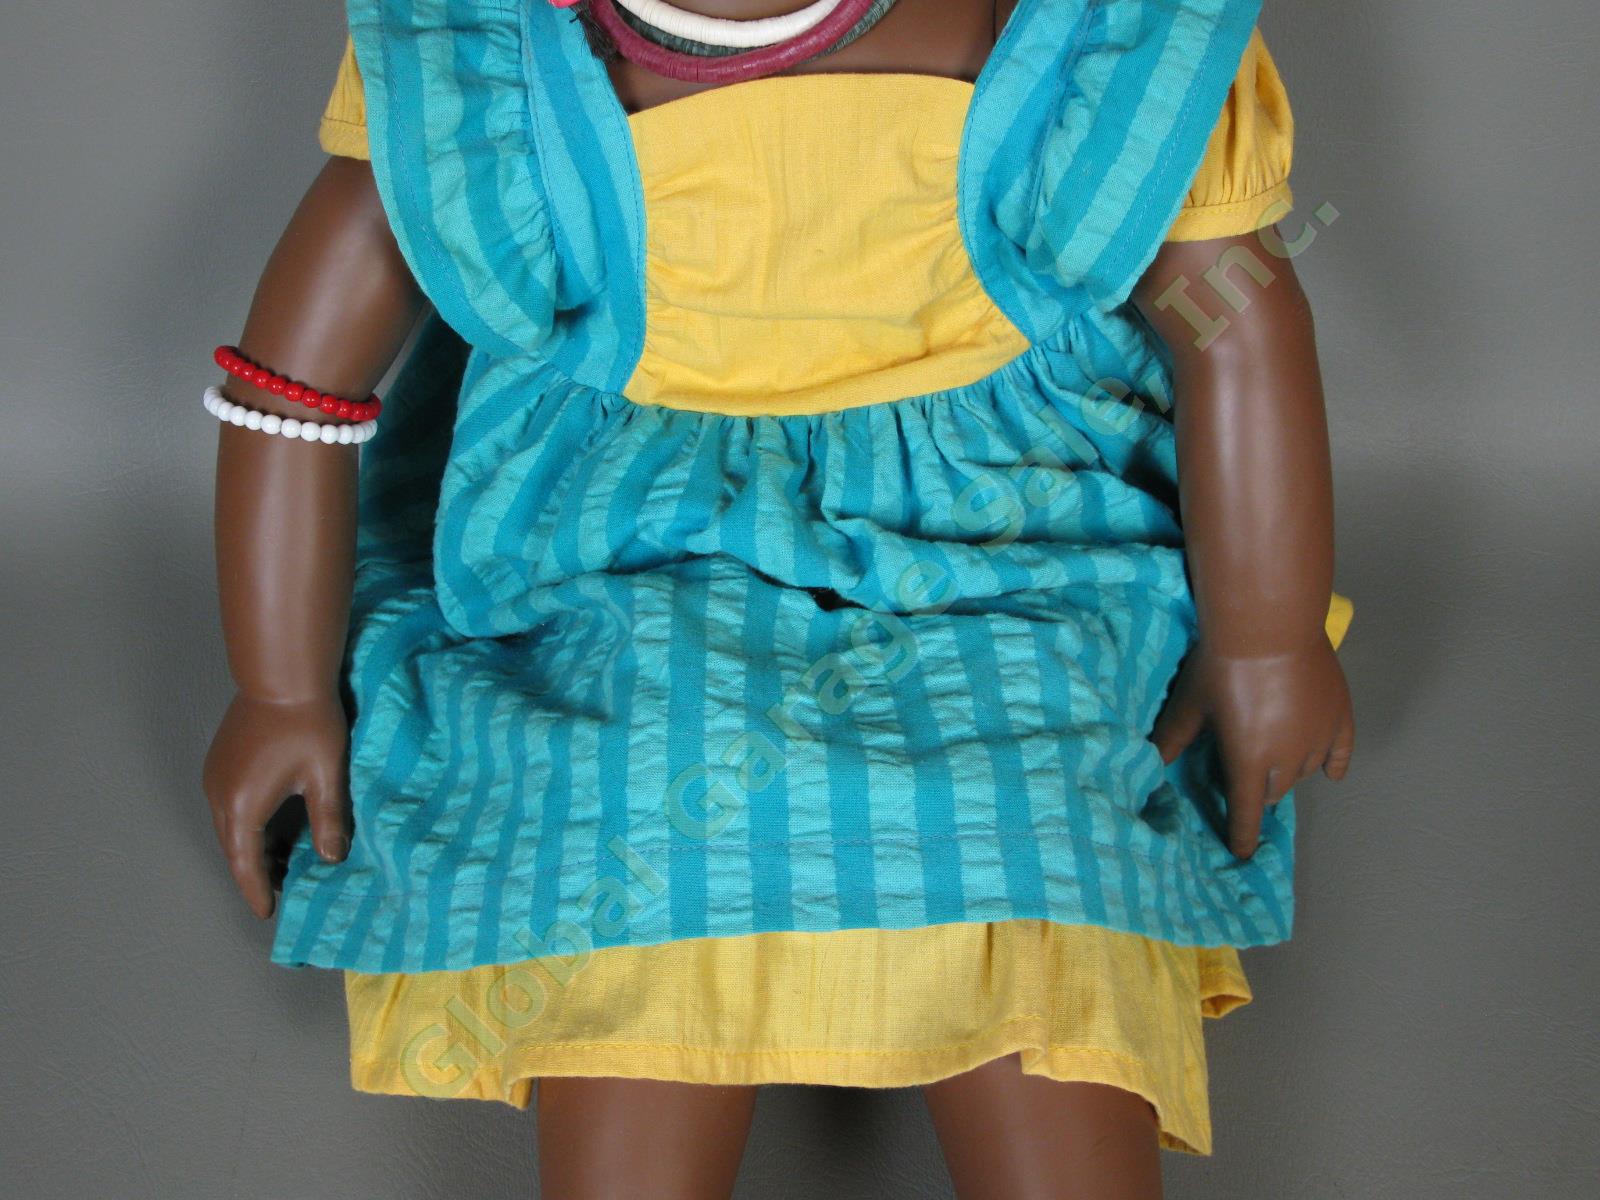 Annette Himstedt 26" Ayoka African Girl Doll 4848 Signed! Orig Box COA Exc Cond! 3